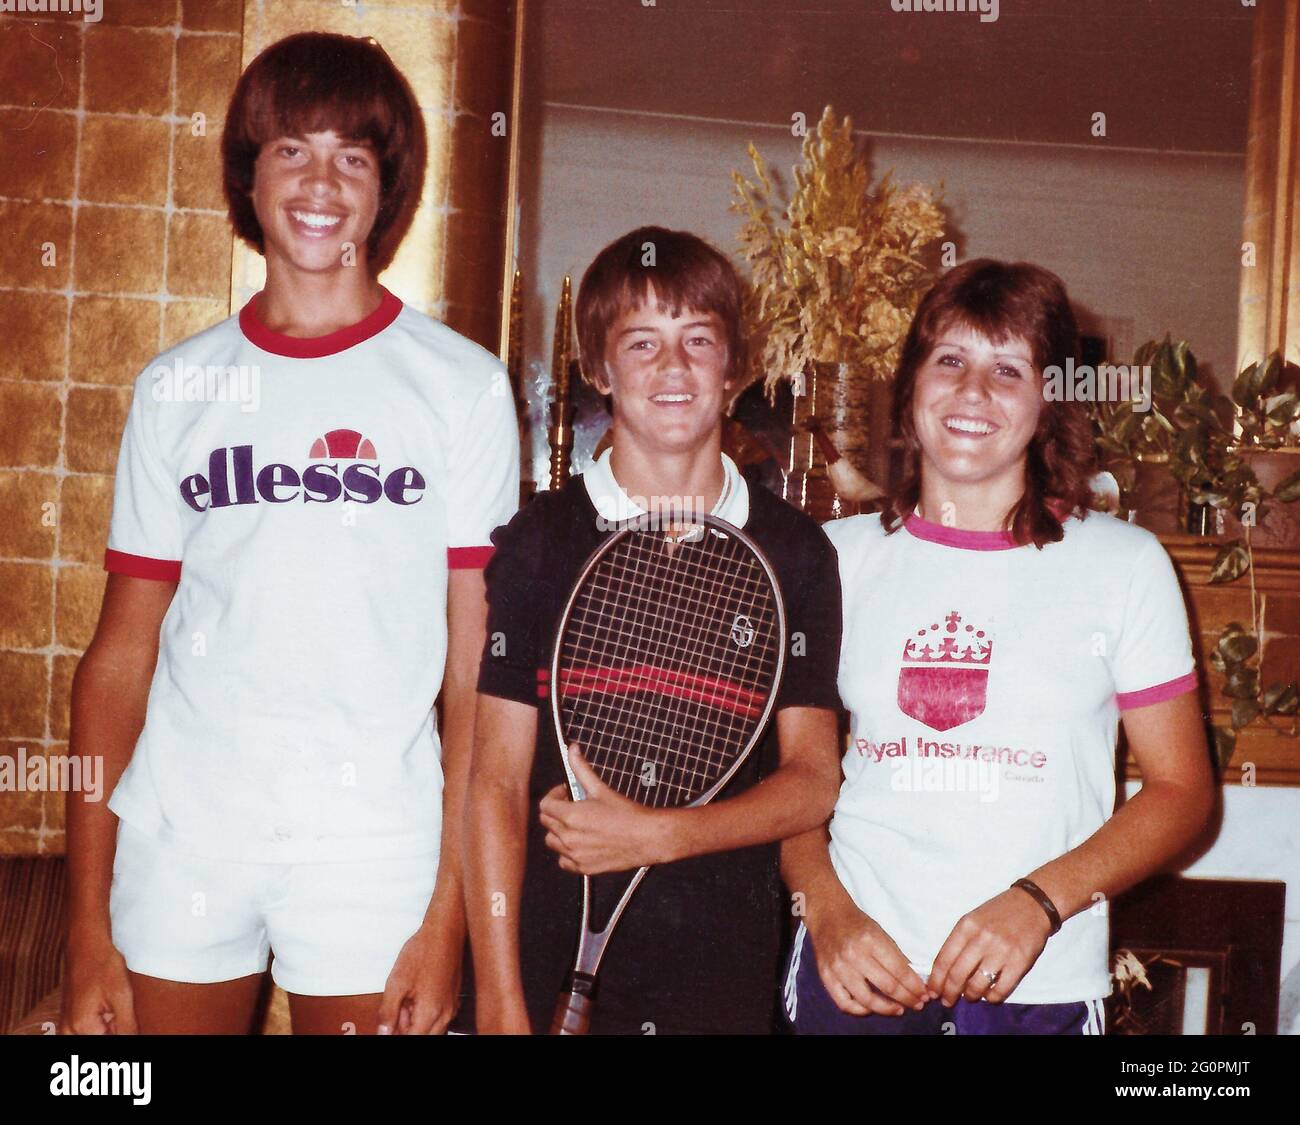 02 June 2021 - Talented junior tennis player Matthew Perry [middle] before his role as Chandler Bing on ''Friends'' one of the most beloved shows in television history.  File Photo: Personal Photo 1985, Hamilton, Ontario, Canada. (Credit Image: © Brent Perniac/AdMedia via ZUMA Wire) Stock Photo